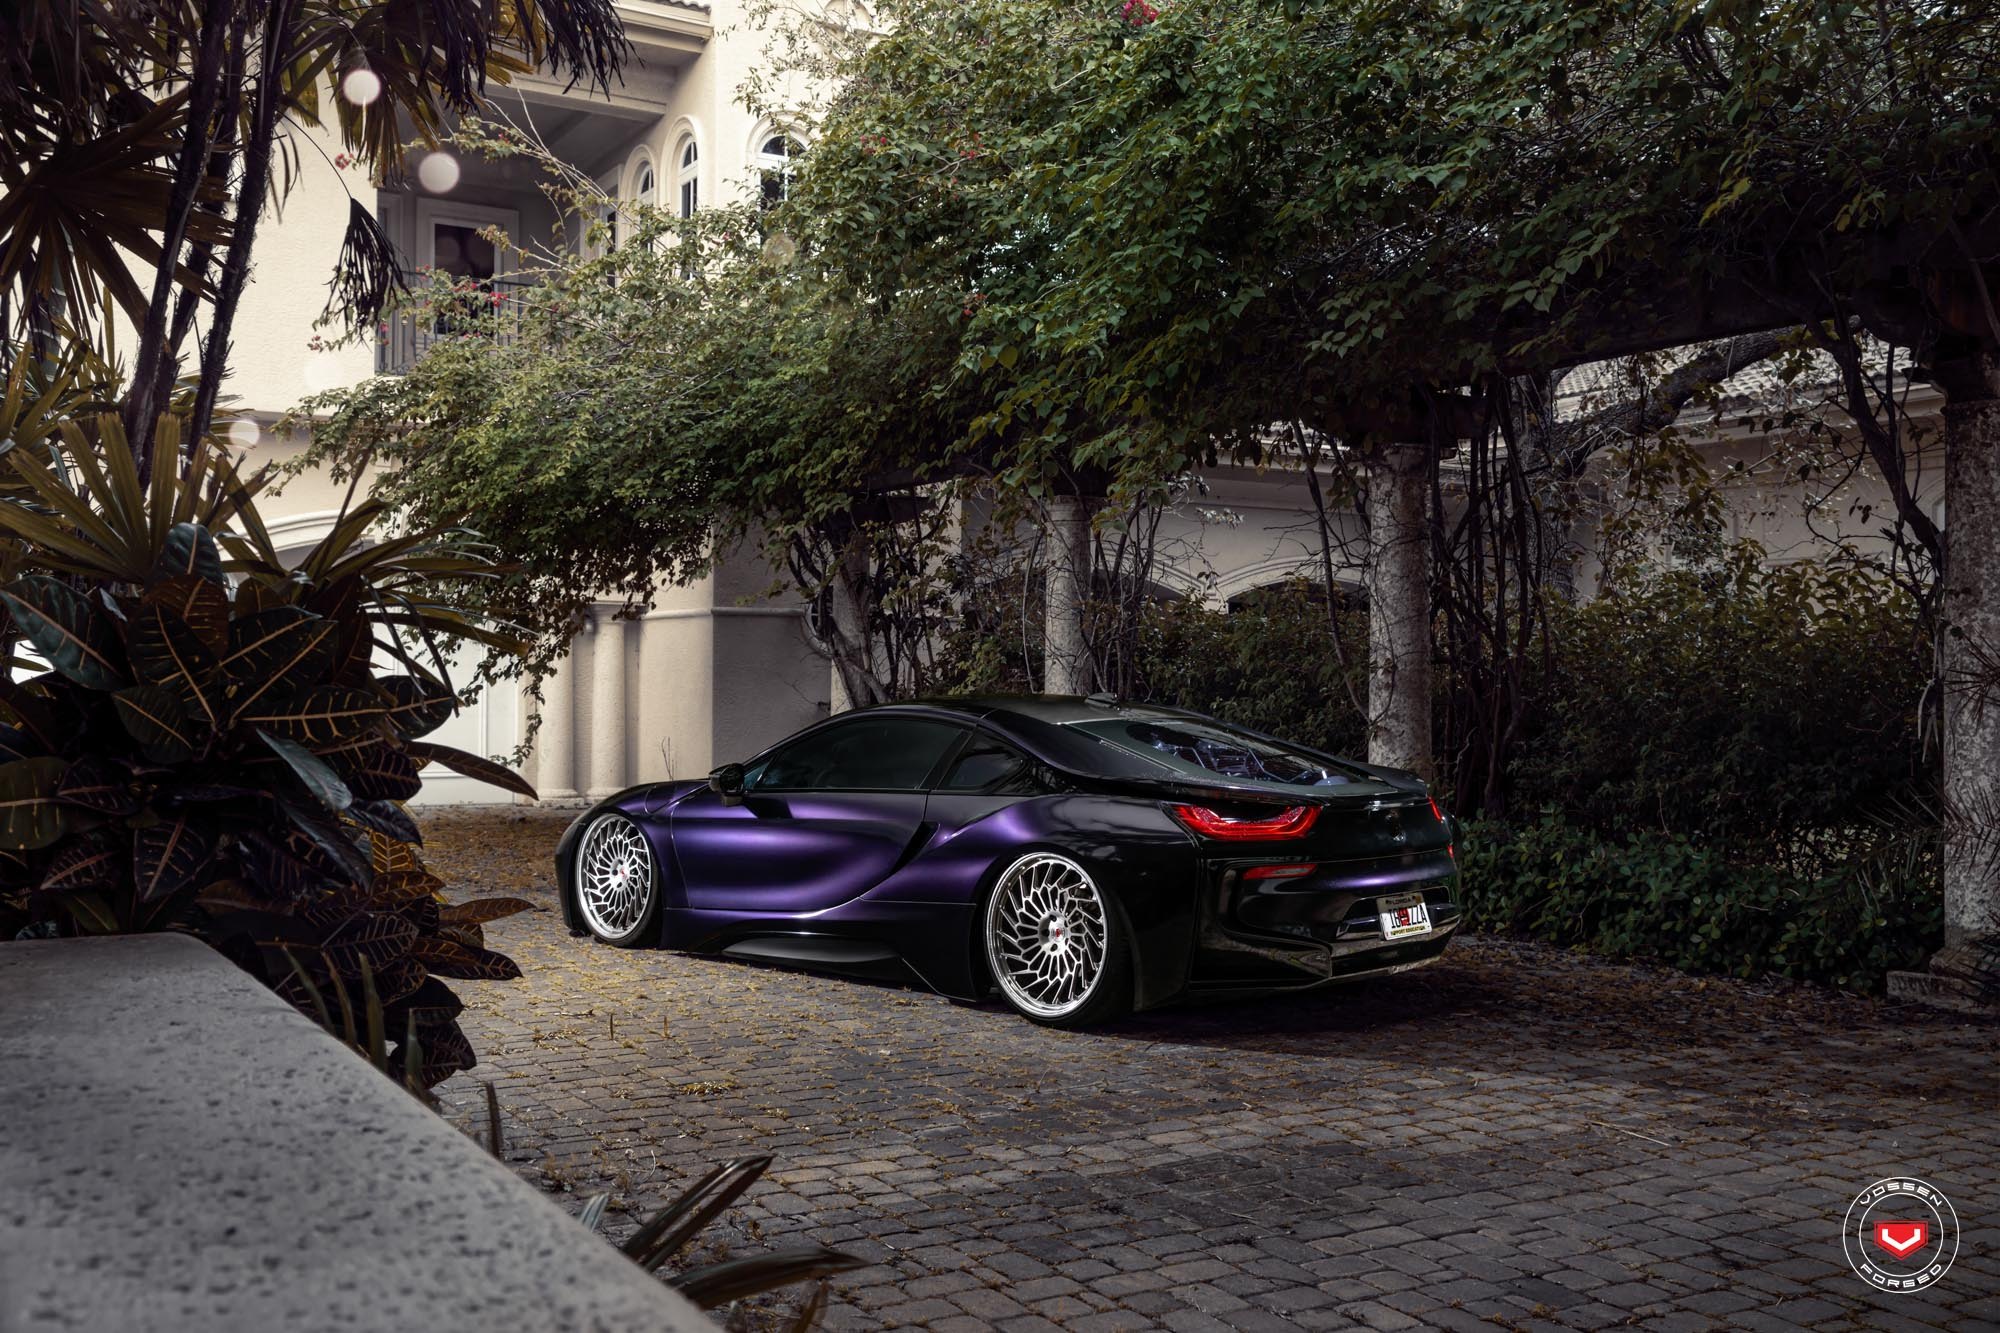 Red LED Taillights on Purple BMW i8 - Photo by Vossen